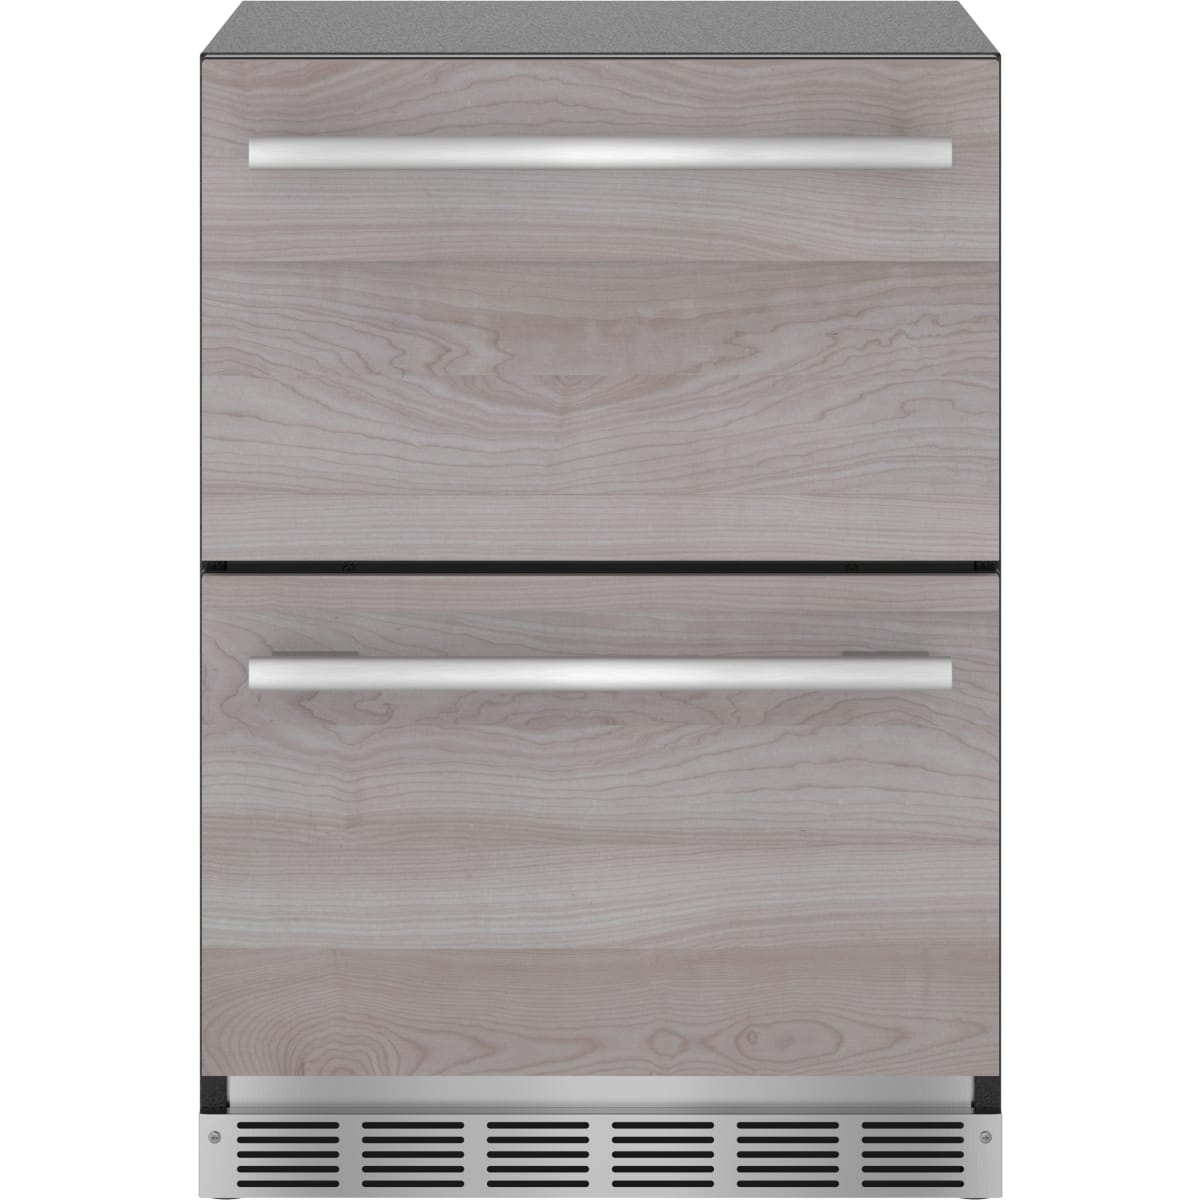 KitchenAid 24 in. 4.29 cu. ft. Undercounter Double Drawer